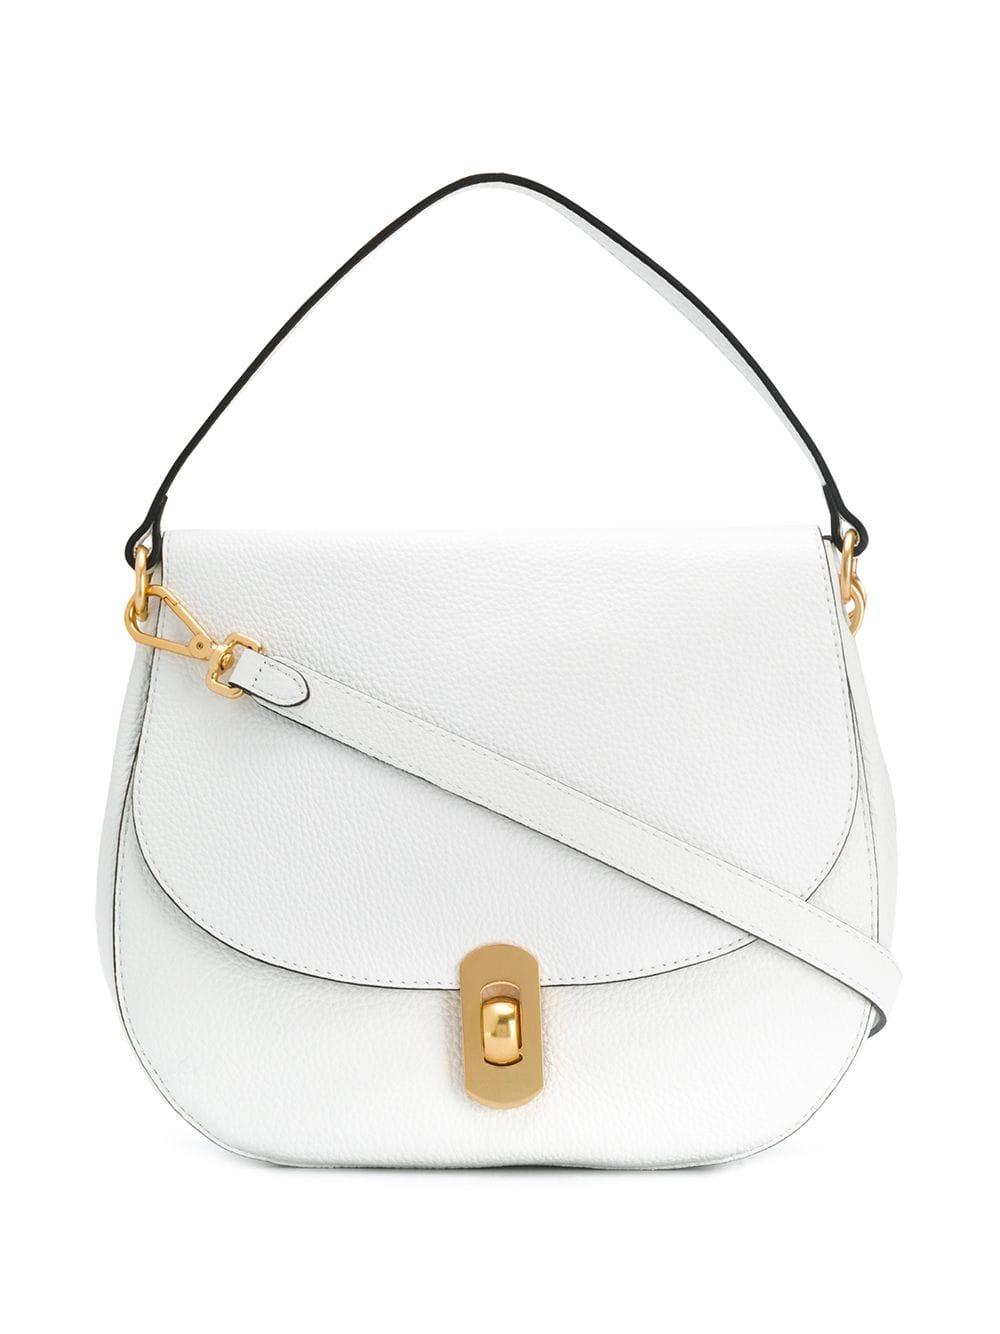 Coccinelle Classic Tote Bag in White - Lyst